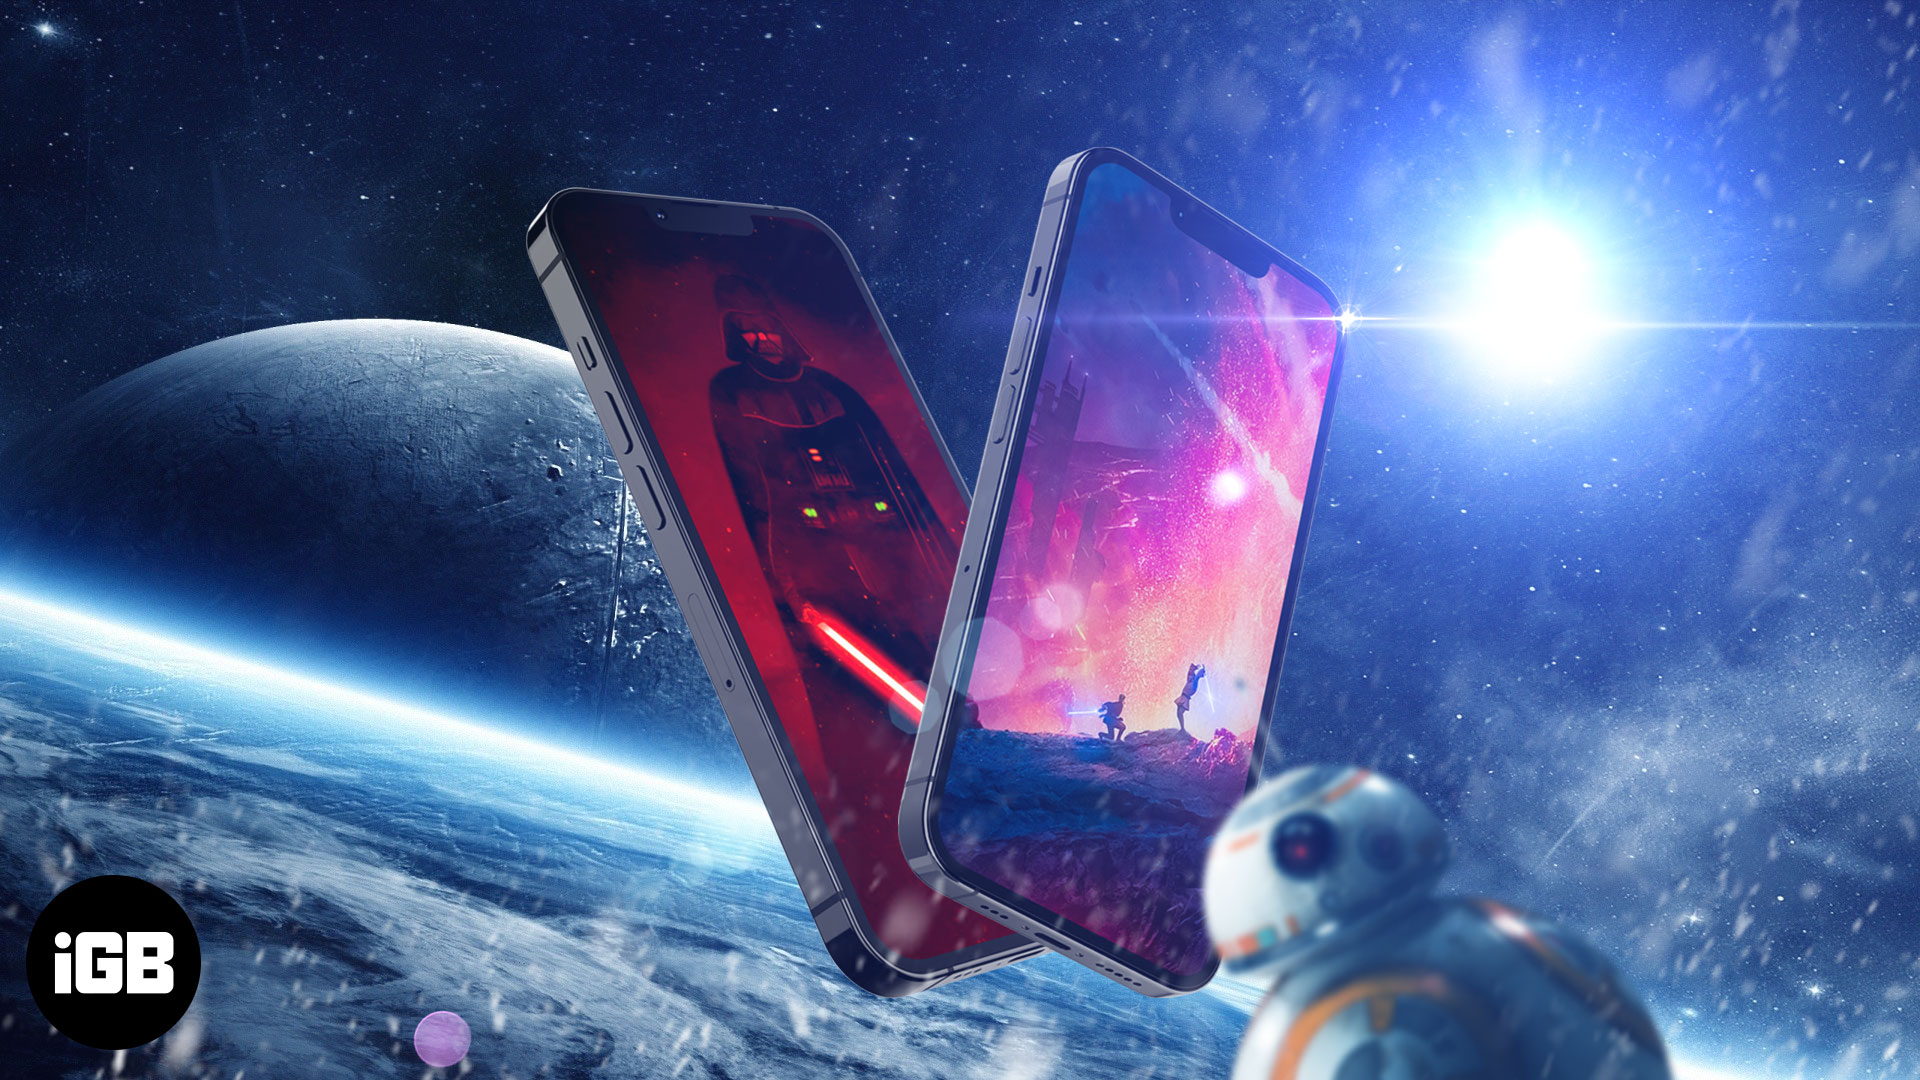 Star Wars wallpapers for iPhone